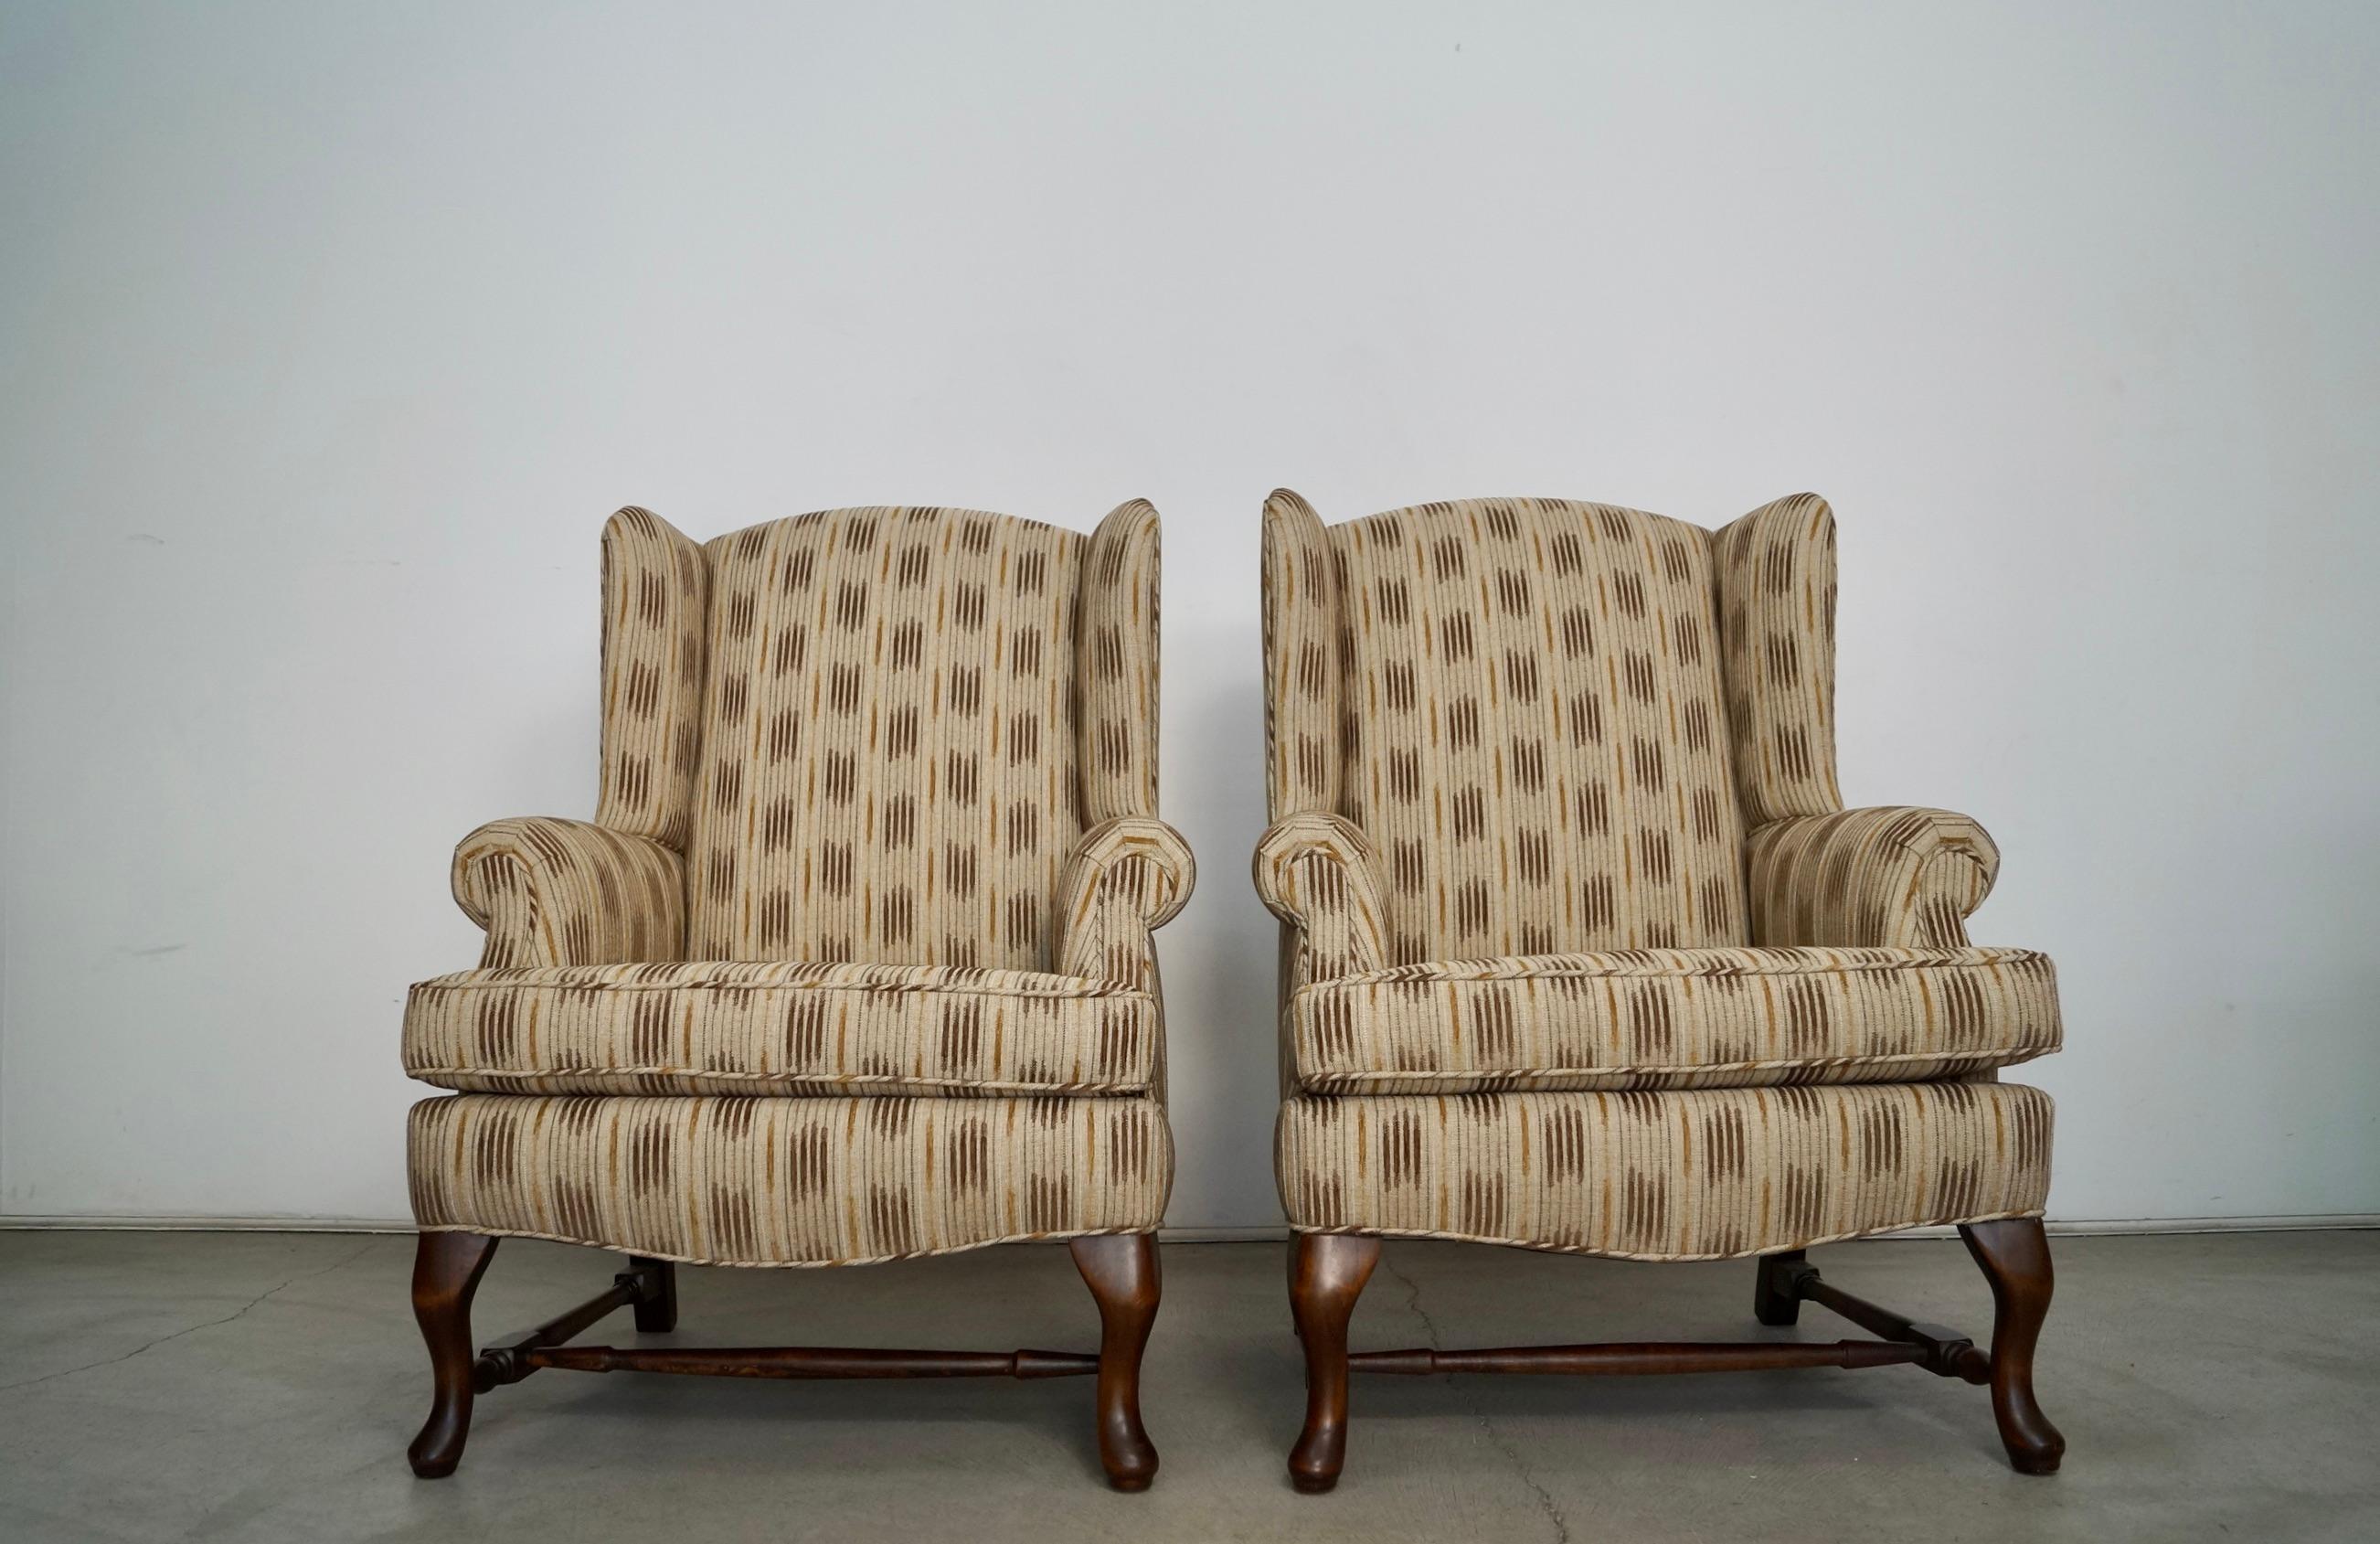 Vintage pair of wing chairs for sale. They are from the 1970's, and have been professionally restored. The wood bases and legs have been refinished in walnut, and have been reupholstered in new fabric and foam. The fabric is a beautiful linen with